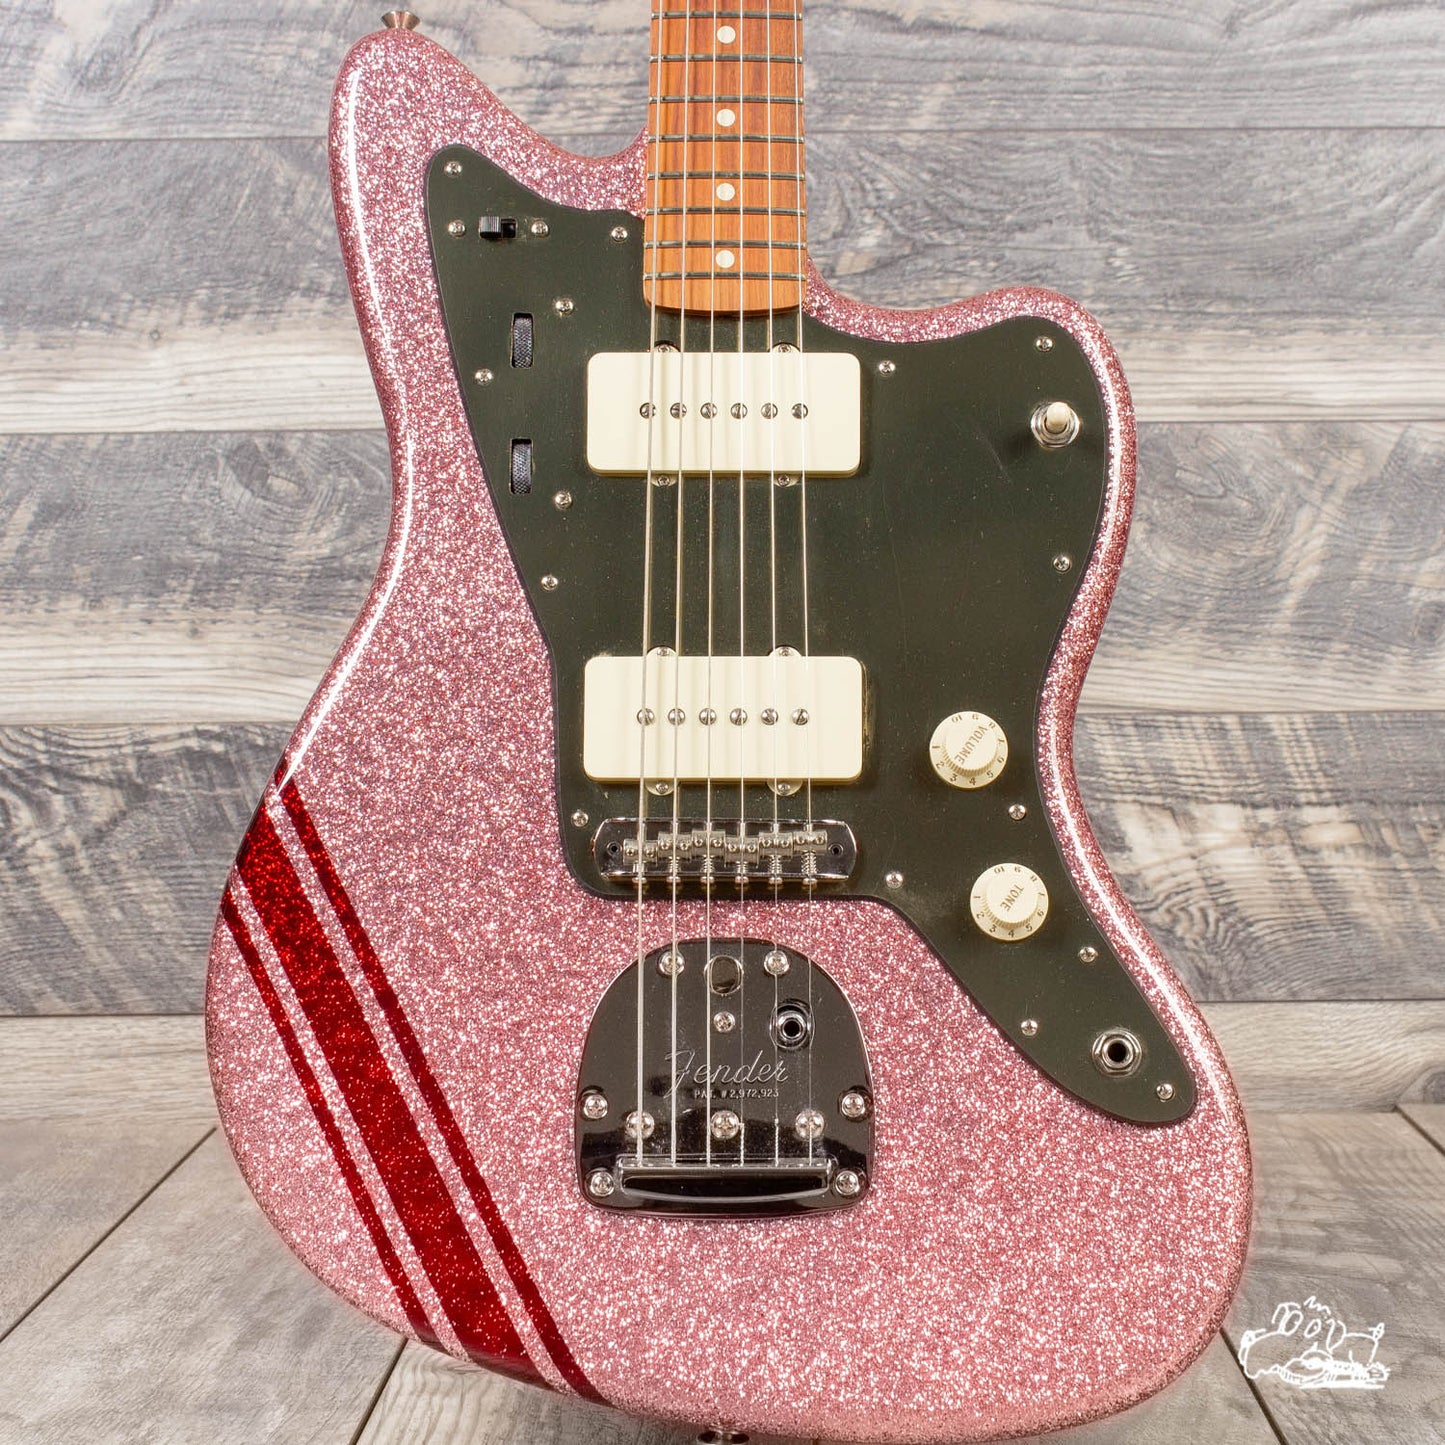 Bell & Hern Custom JazzCaster Finished in "Cousin Strawberry" Sparkle